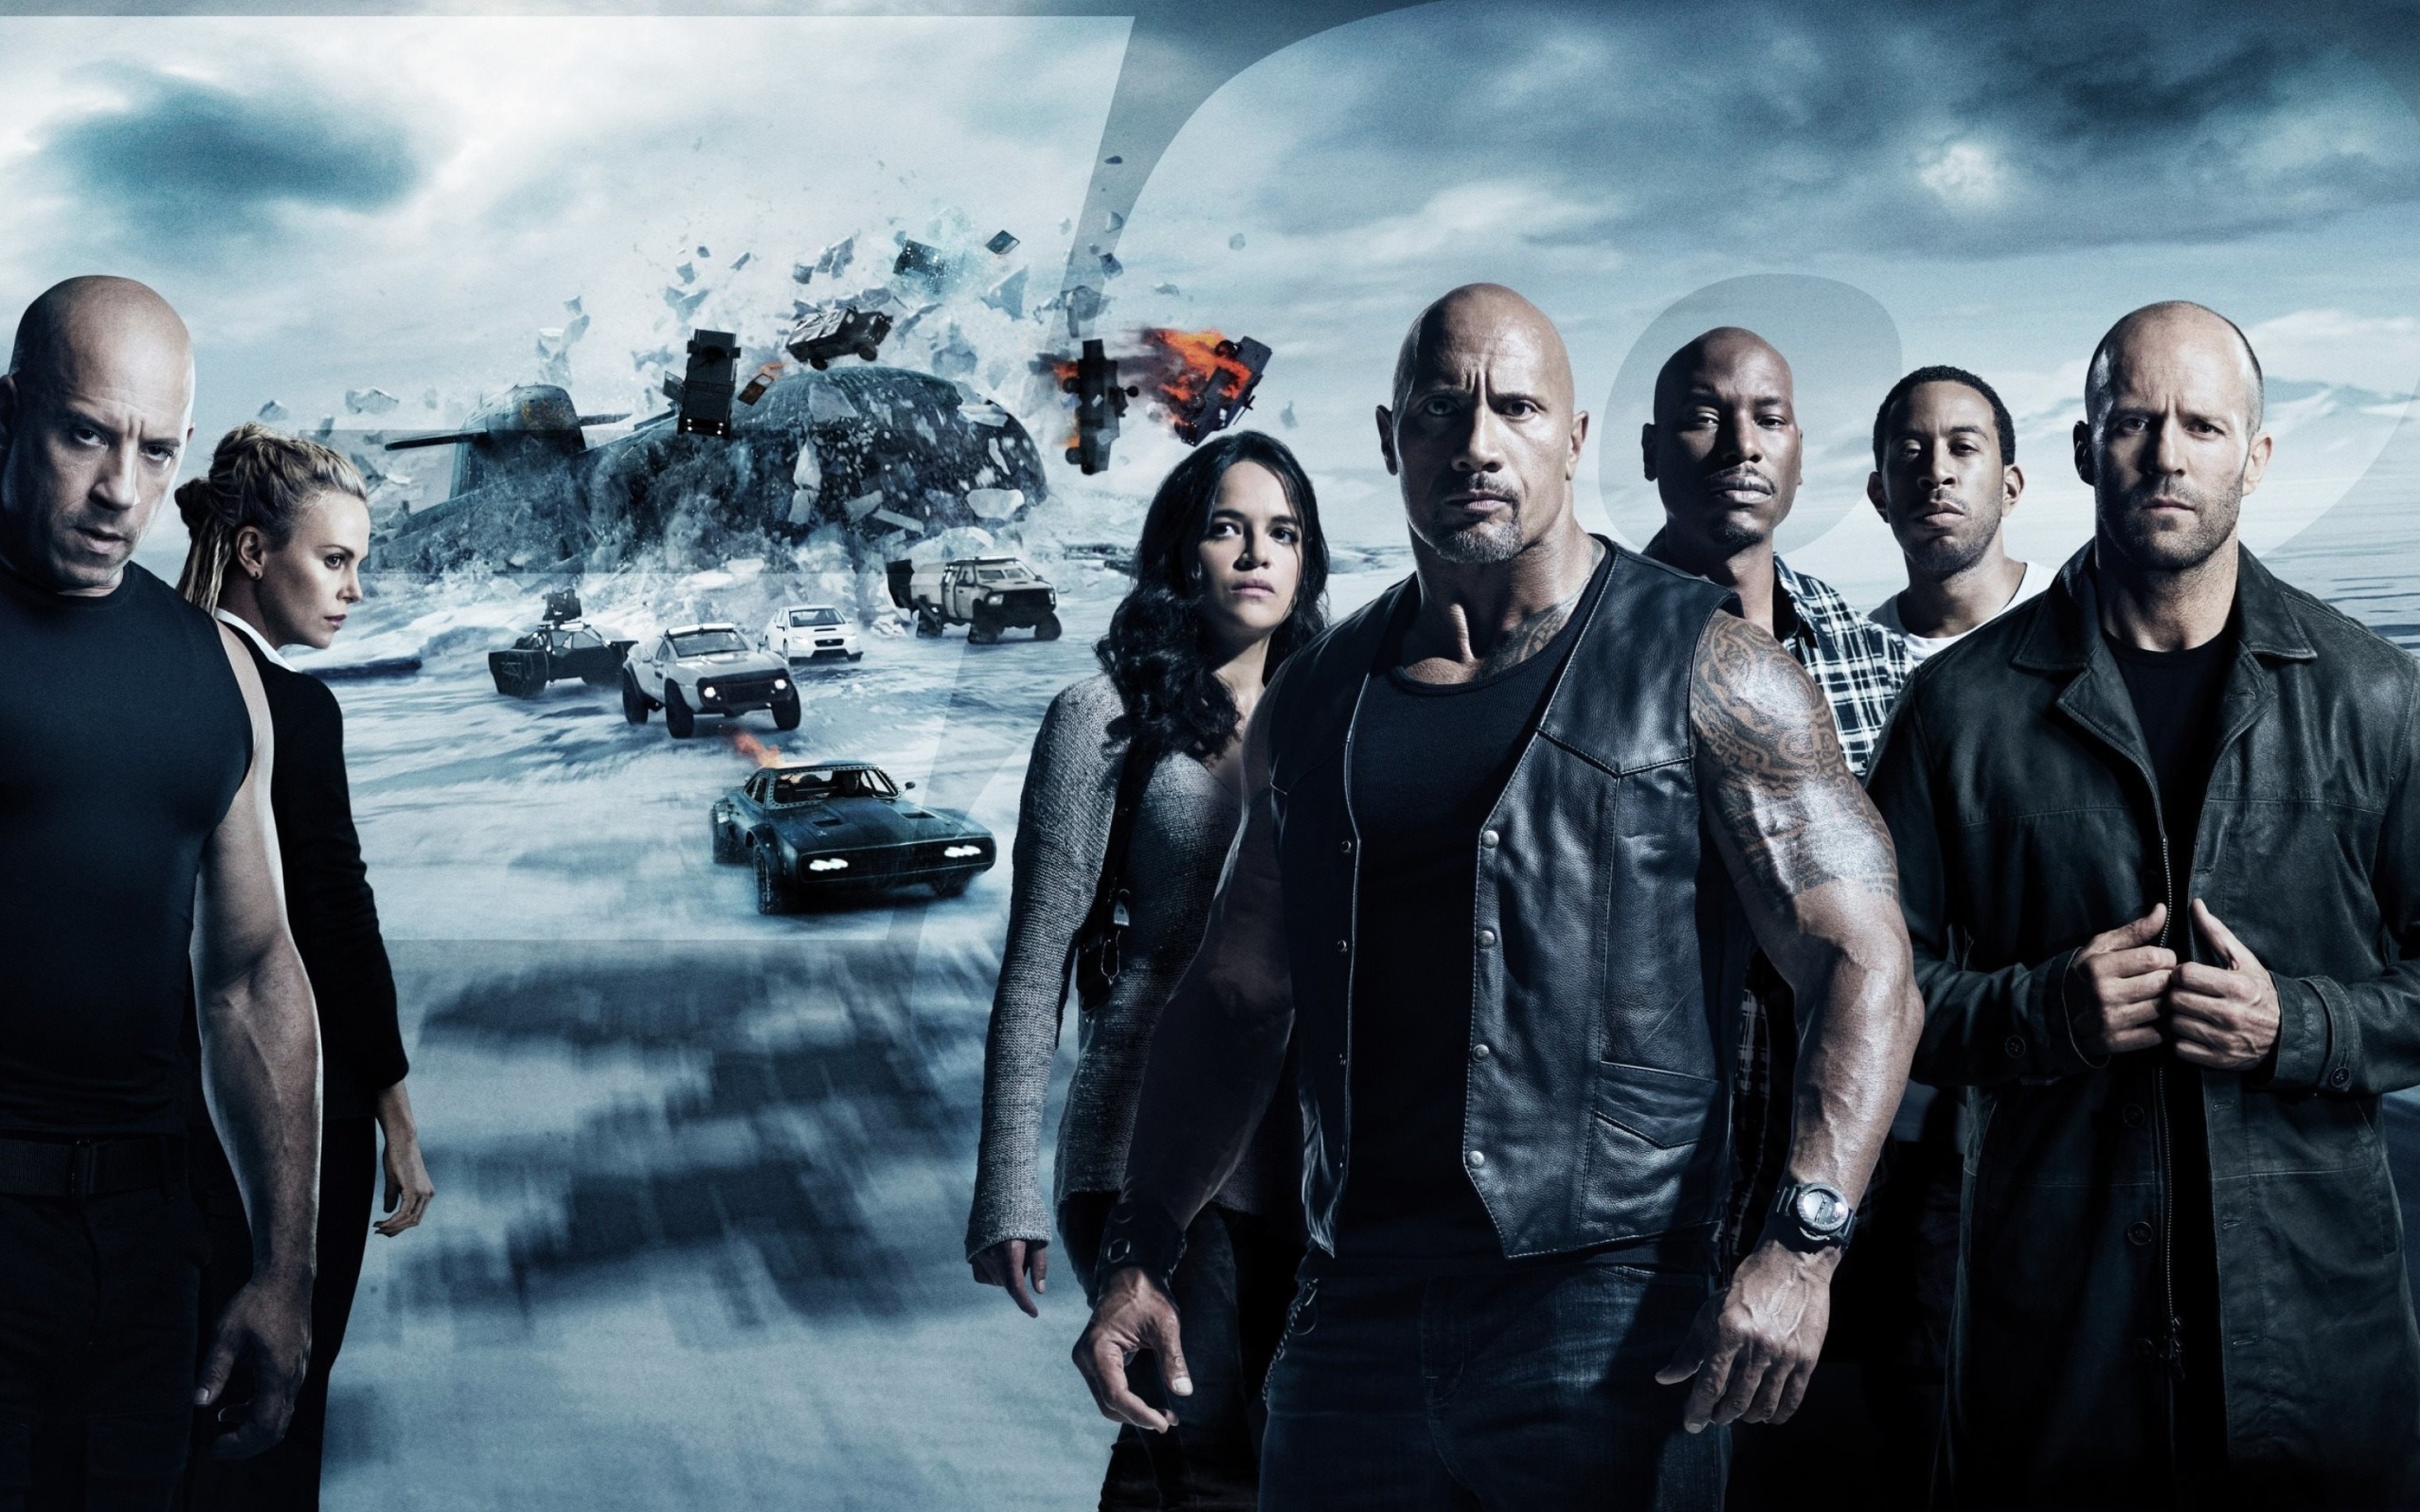 Das The Fate of the Furious with Vin Diesel, Dwayne Johnson, Charlize Theron Wallpaper 2560x1600